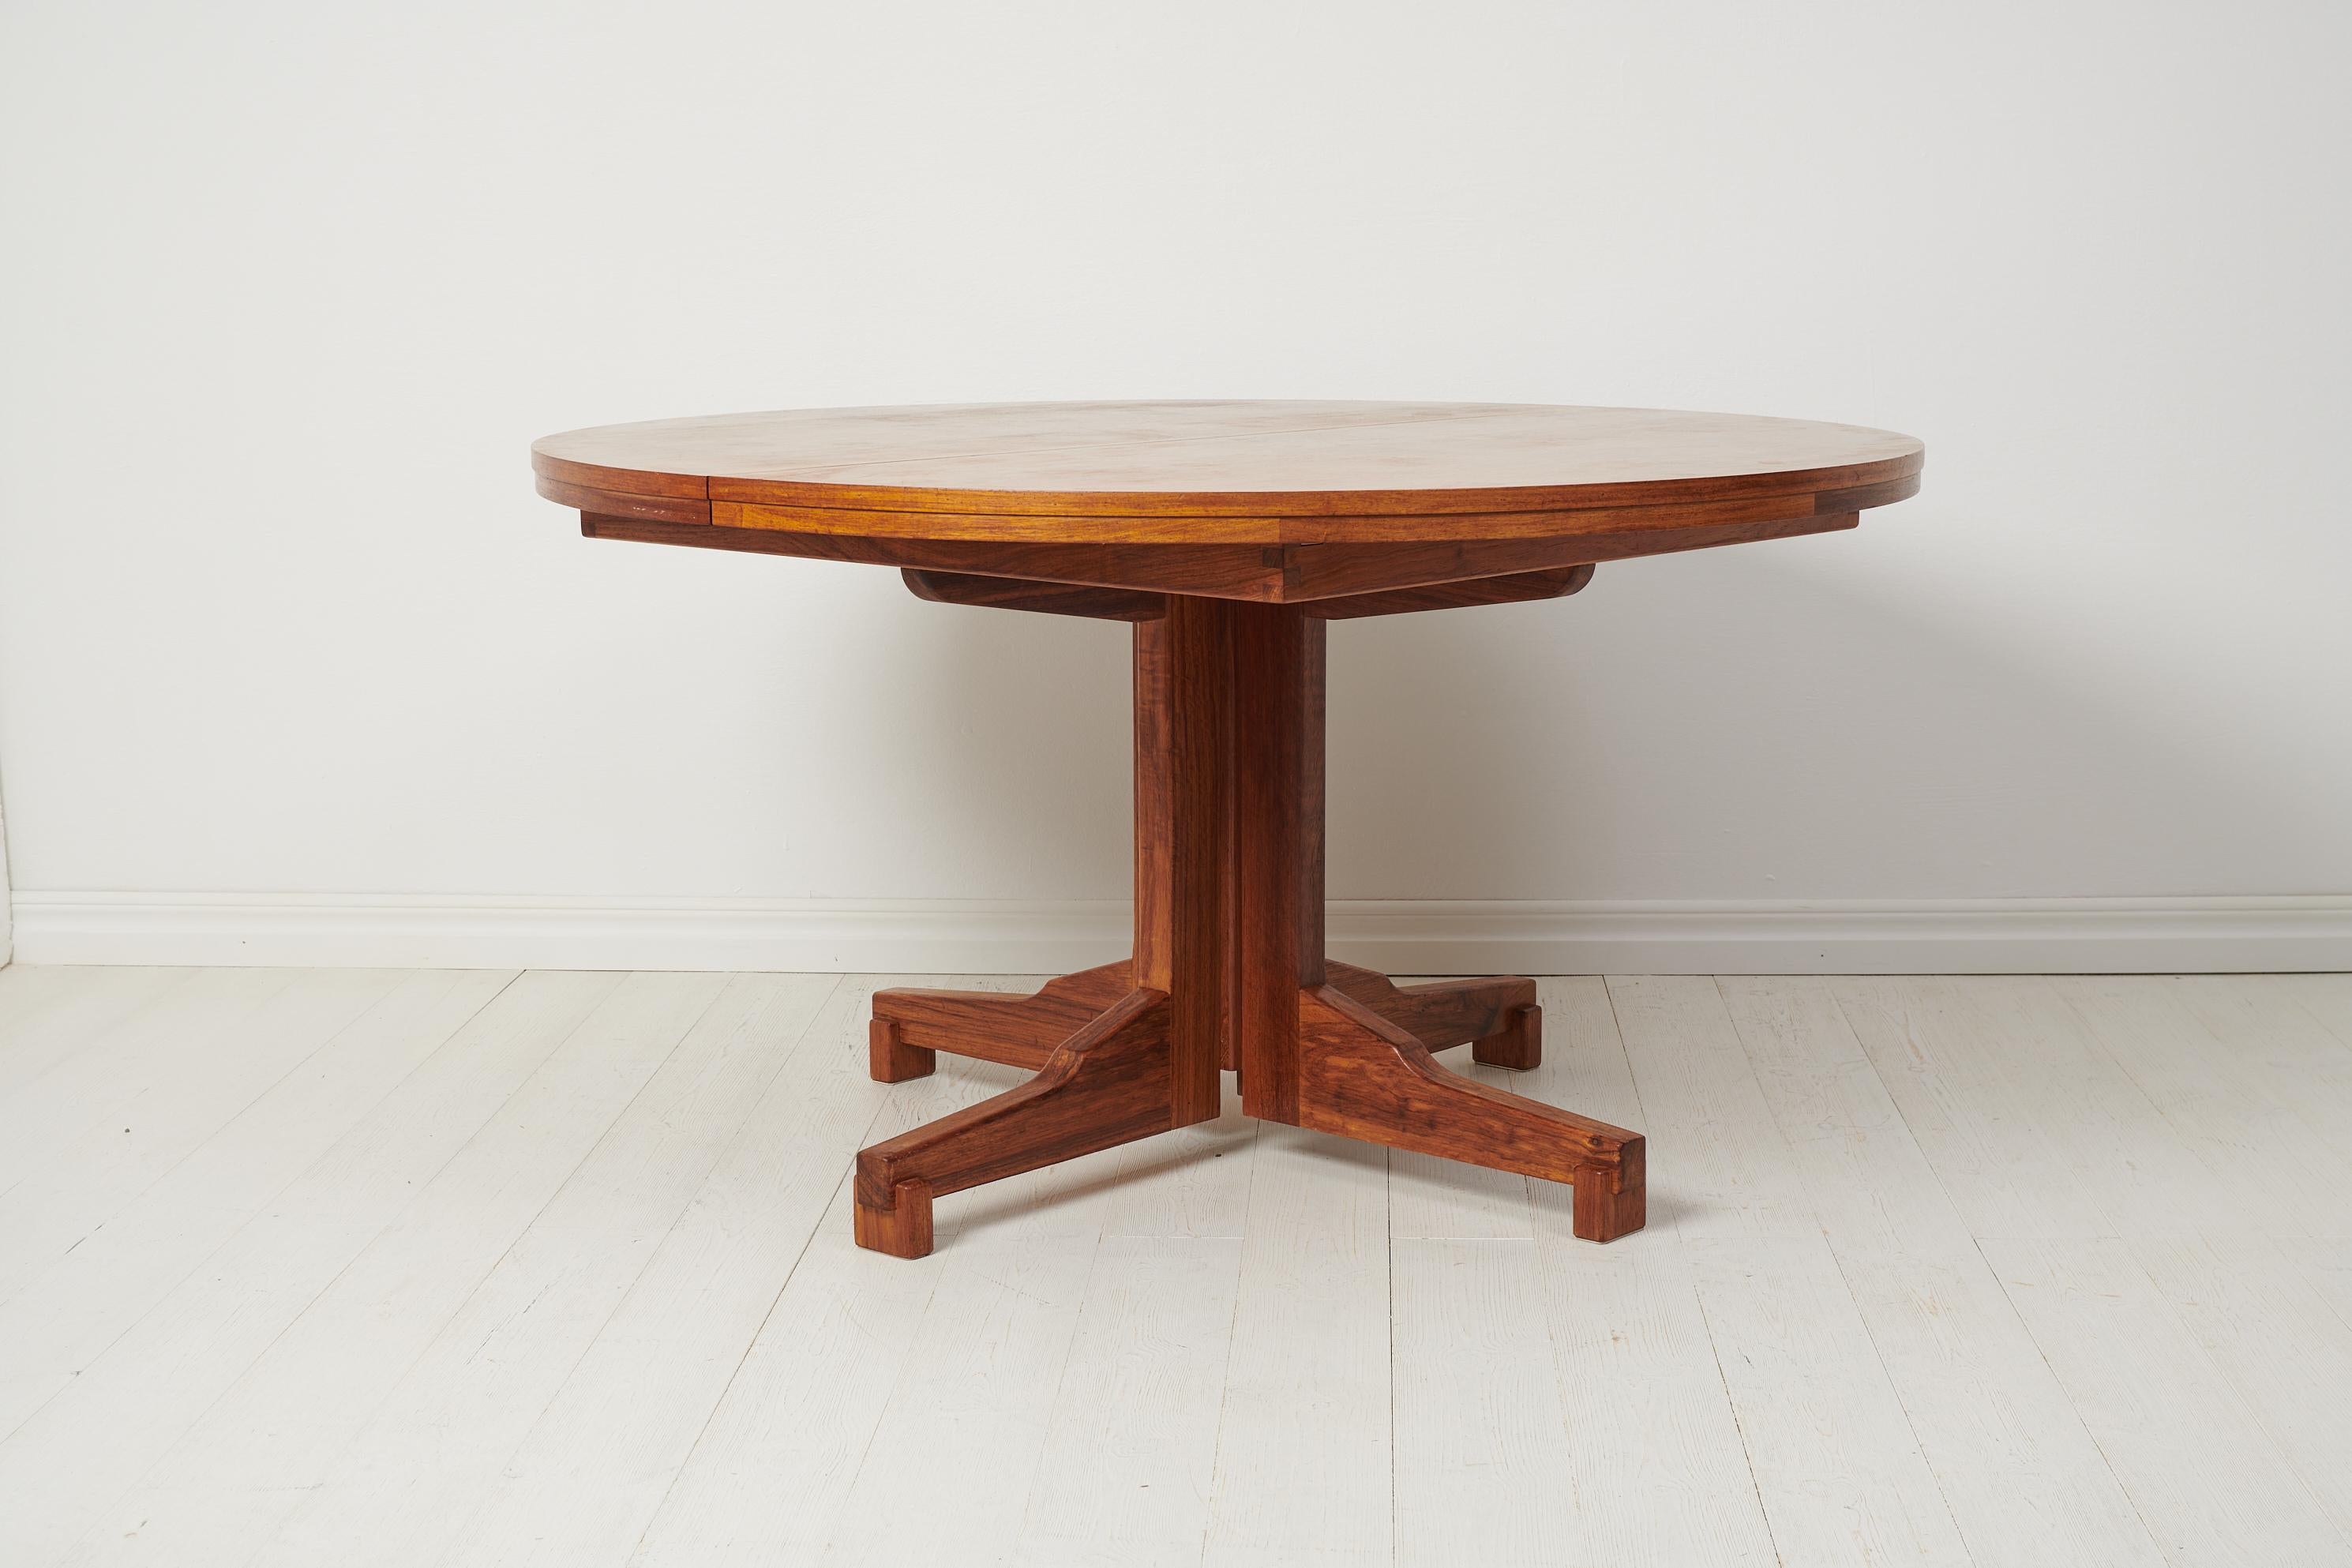 Scandinavian Modern dining table from Sweden made during the Mid-20th Century, around 1950 to 1960. The table is stylish and elegant with all the values of the Scandinavian Modern style. It is a good size with a round table top and two extra